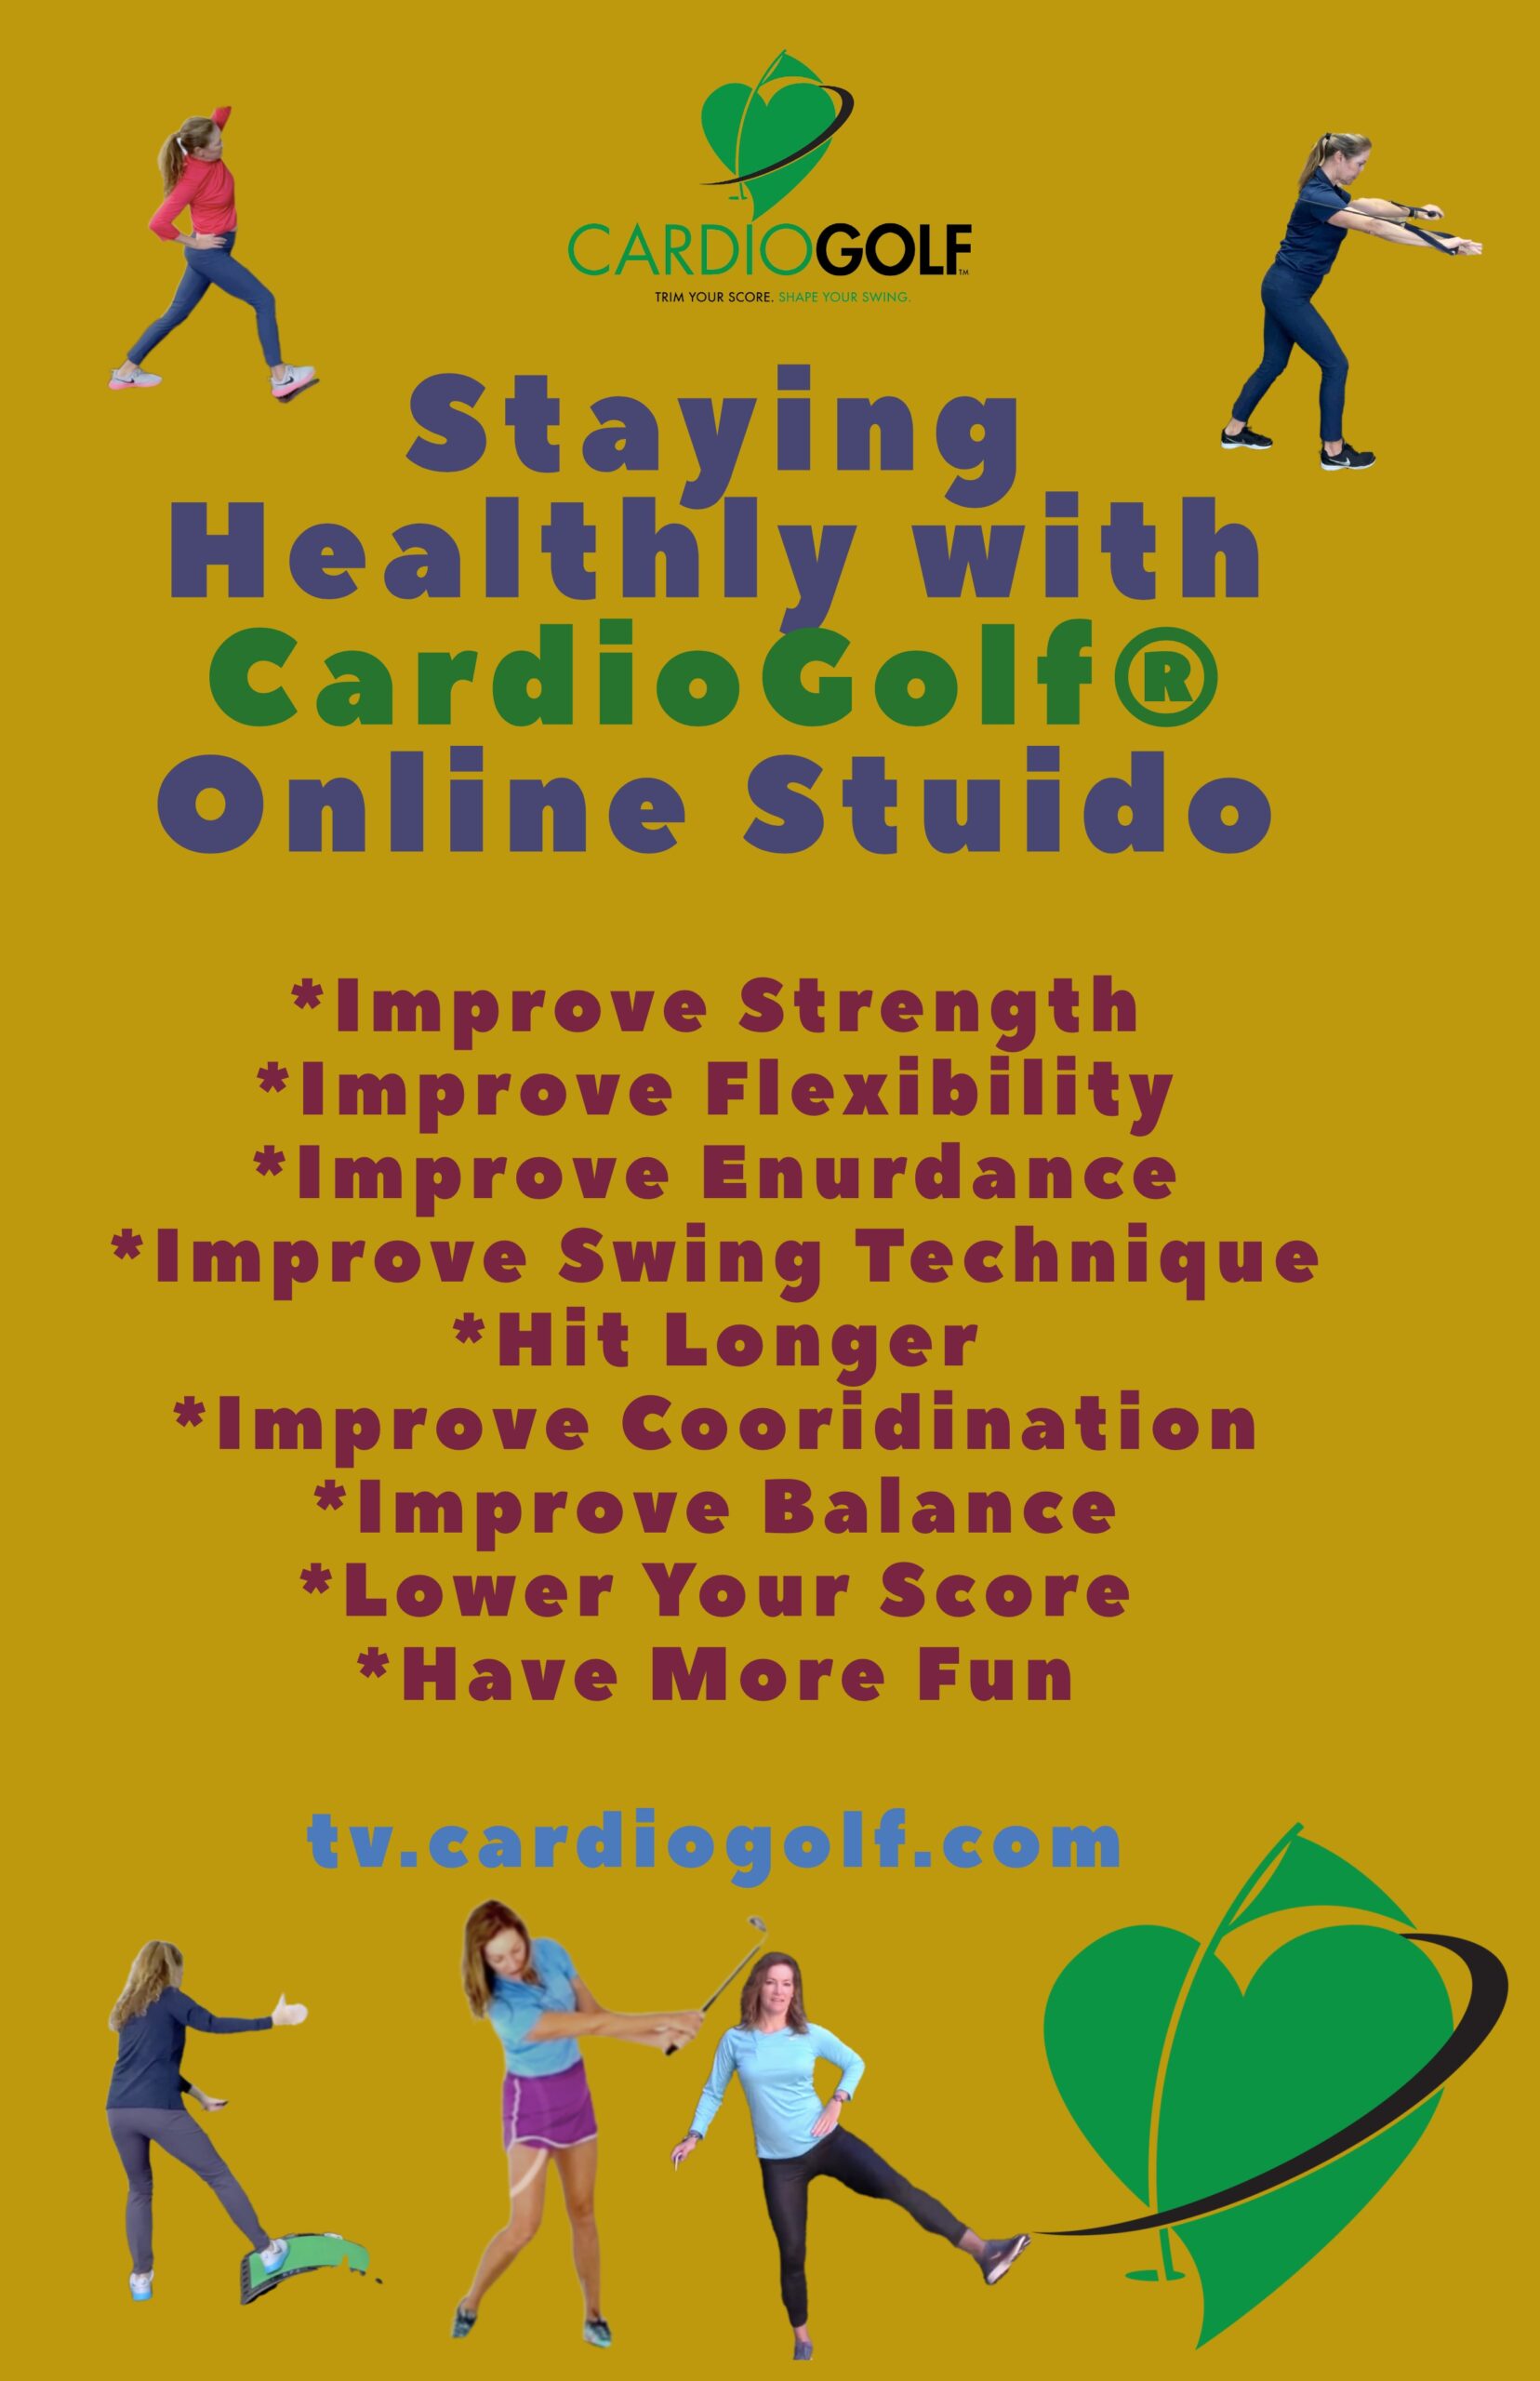 CardioGolf® can help prevent aging and keep you swinging stronger for longer! tv.cardiogolf.com